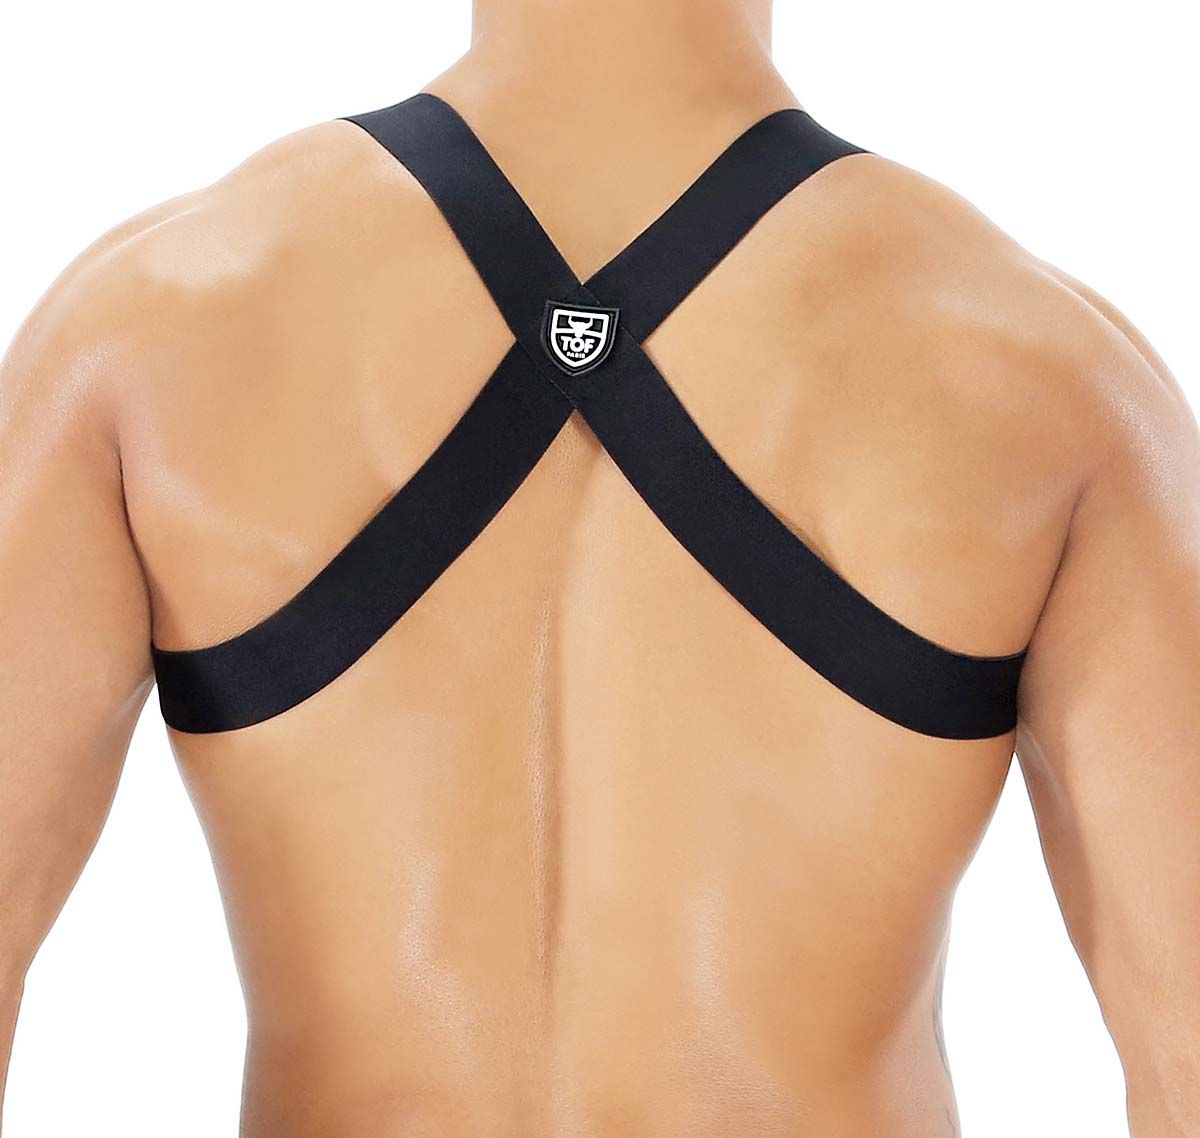 TOF Imbracatura PARTY BOY ELASTIC HARNESS BLACK H0018N, nero